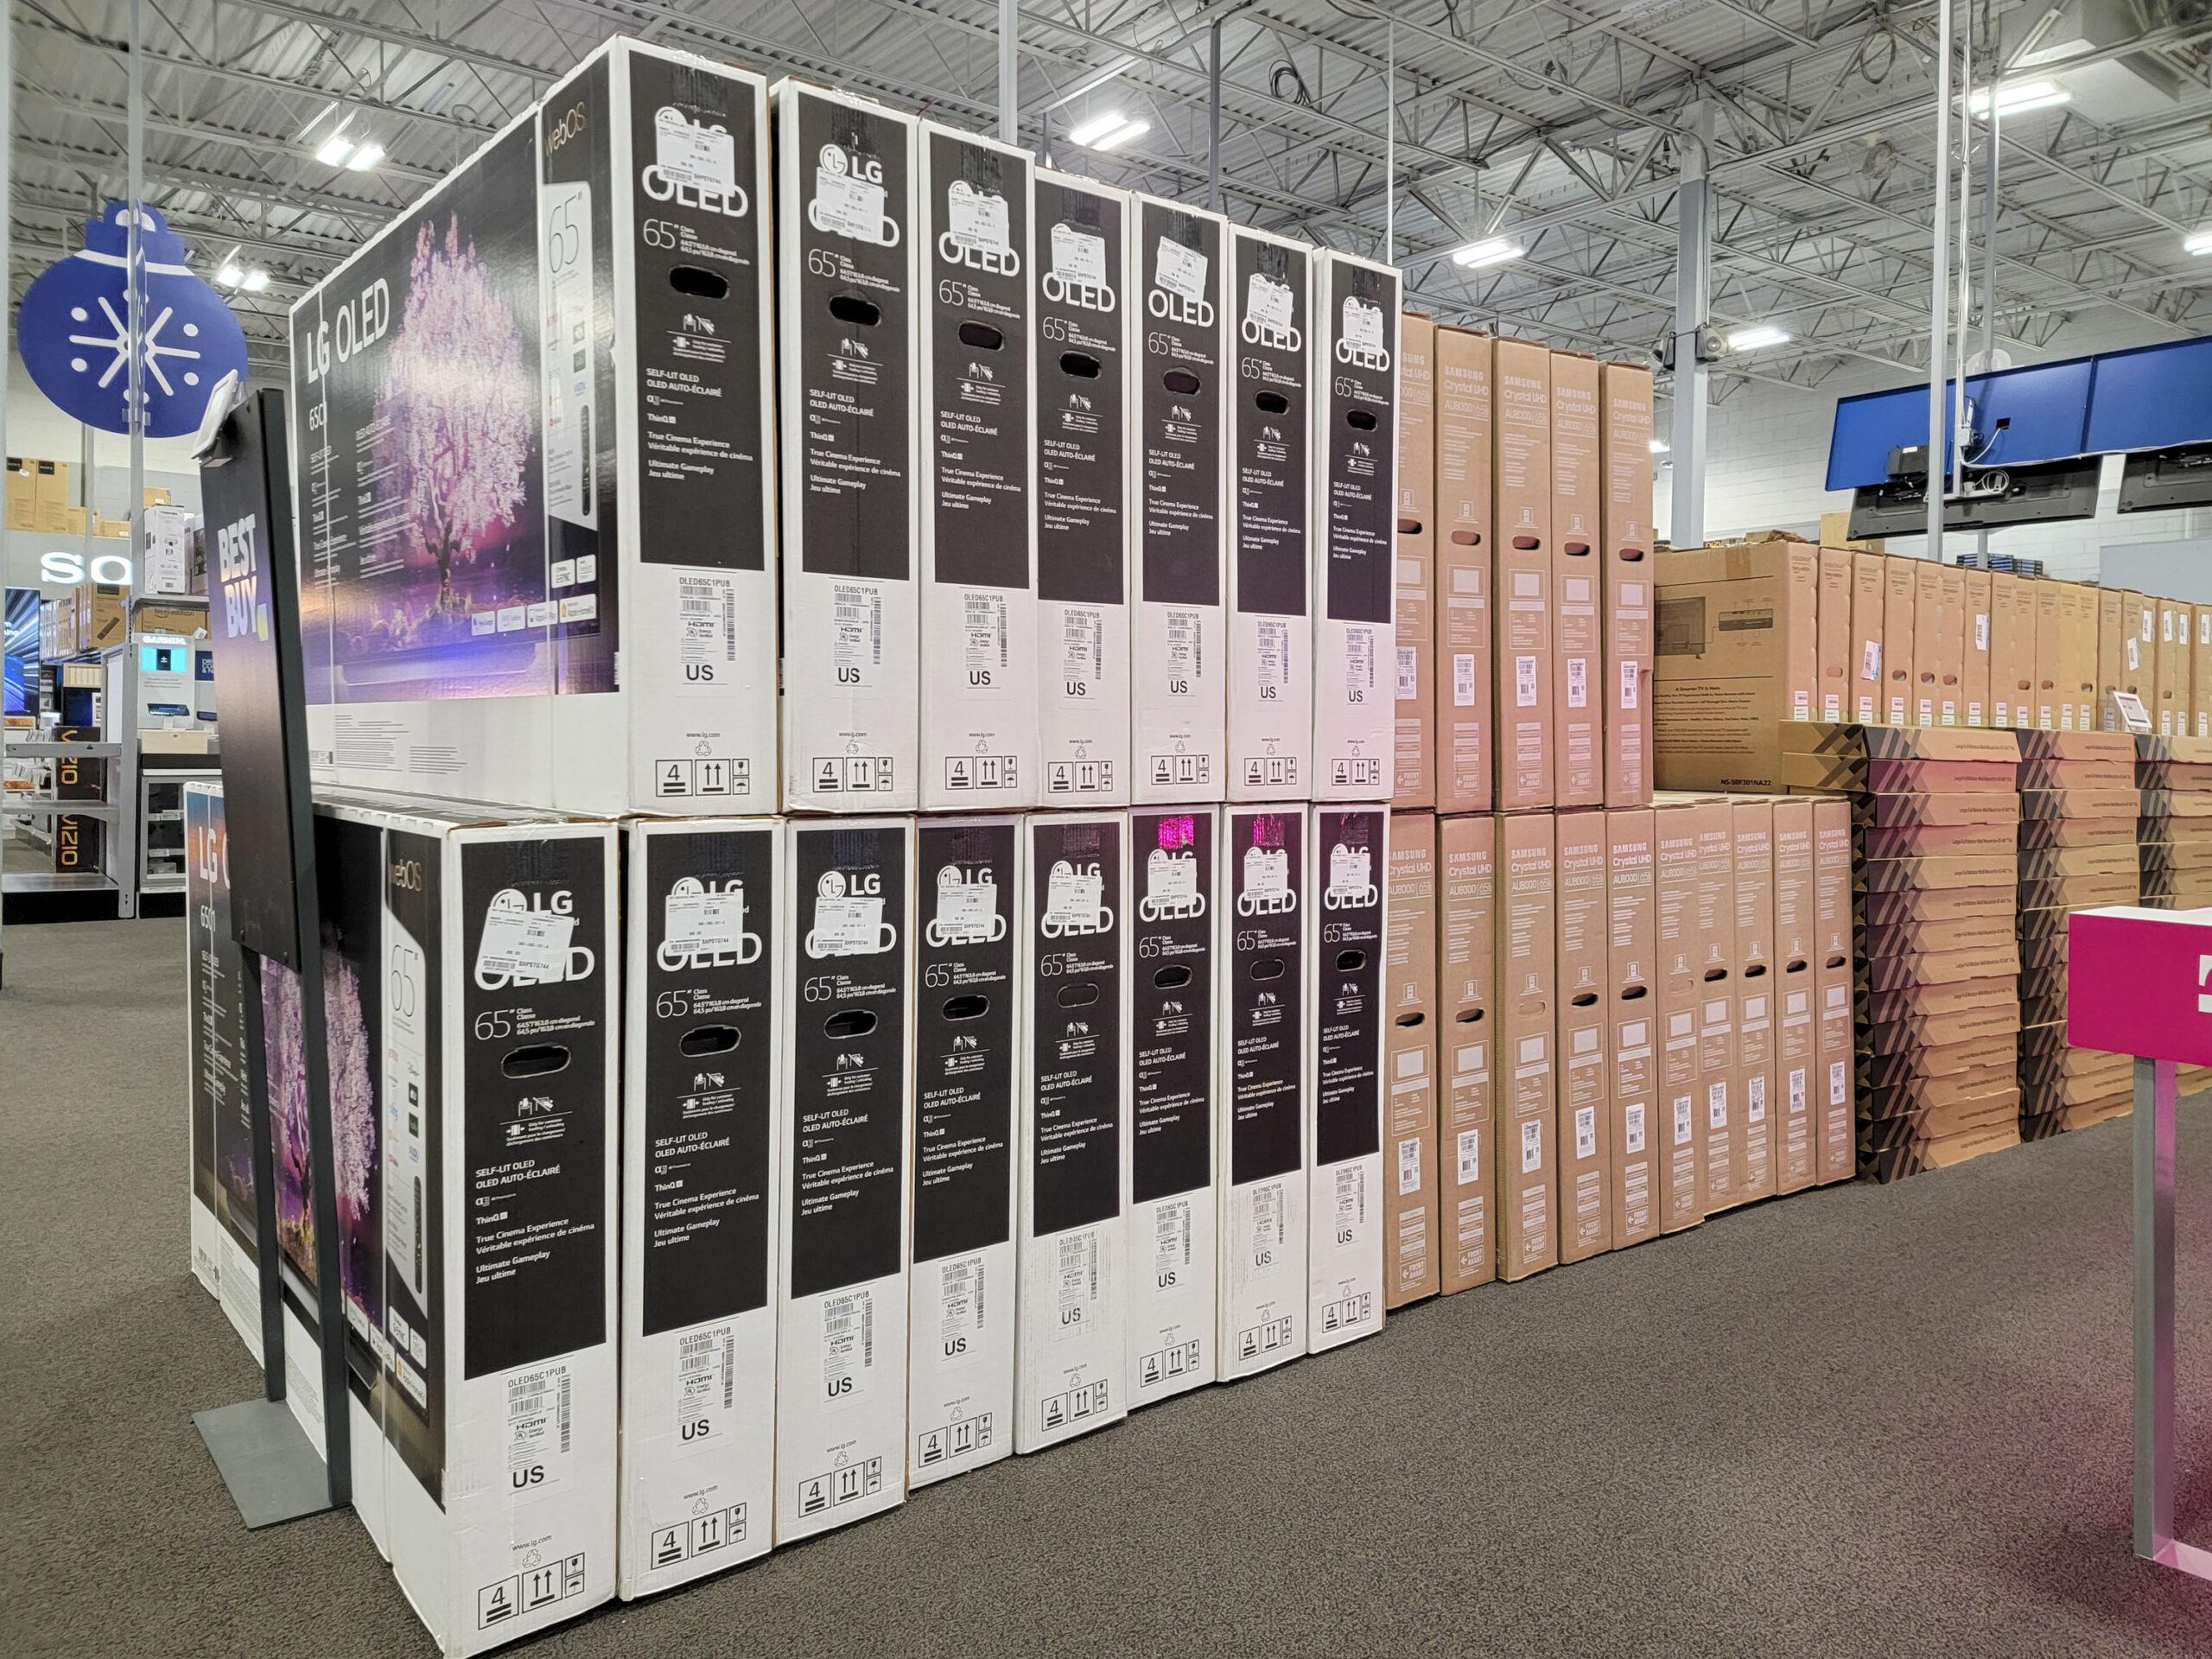 TV deals have long been a staple of Black Friday madness. But I've never seen so many pre-stocked TVs in one store. 66cd7768 20211119 165512 scaled